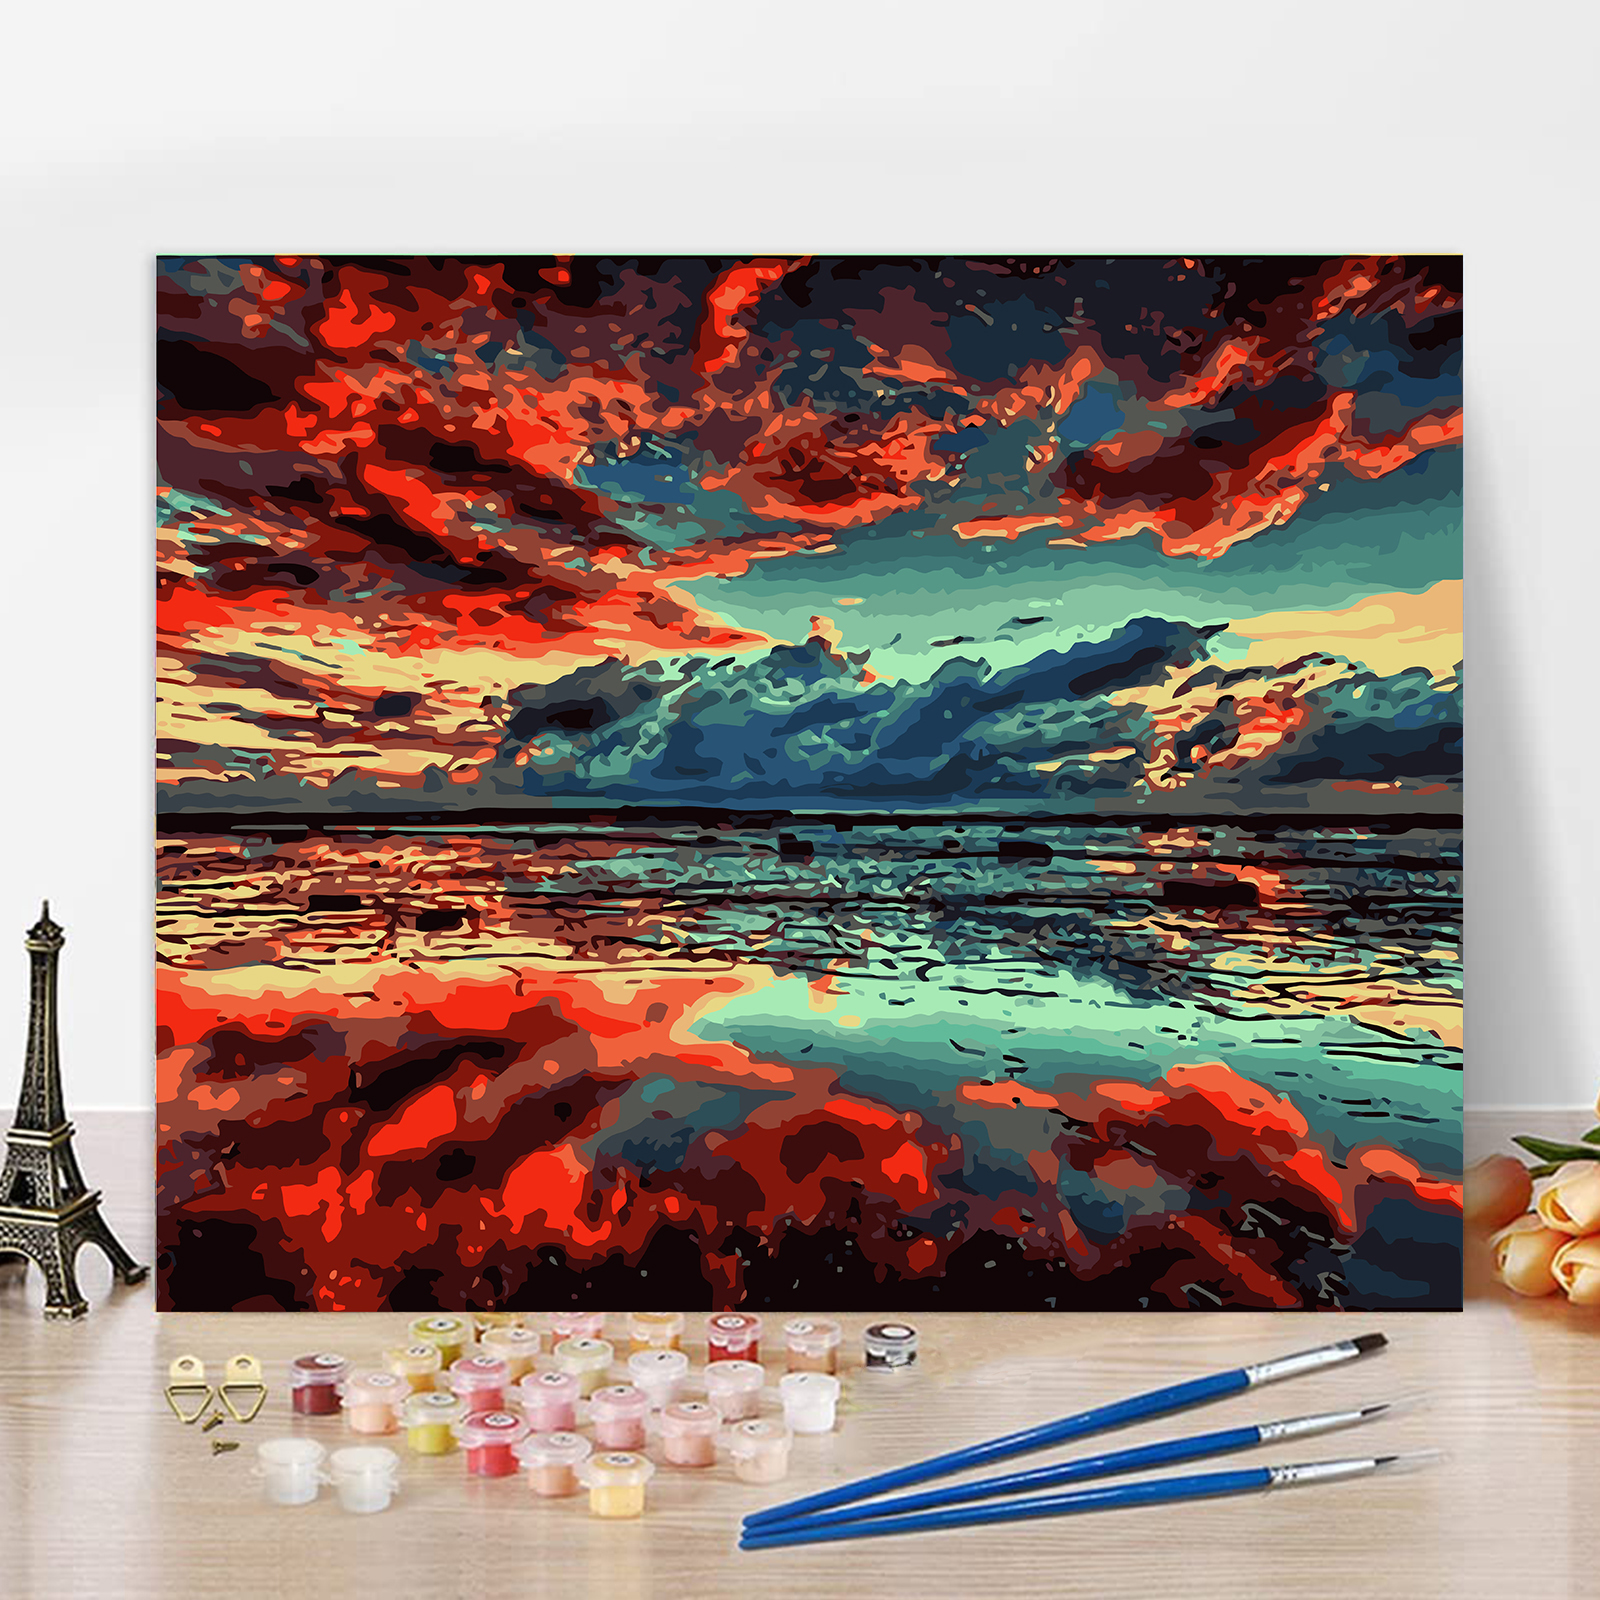  TUMOVO Color by Number 16X20 Inch, Seaside Sunset Landscape  Paint by Number for Adults, Acrylic Painting Kit with 3 Brushes and Acrylic  Pigment, Best Painting Gift for Friends, Family (Frame)